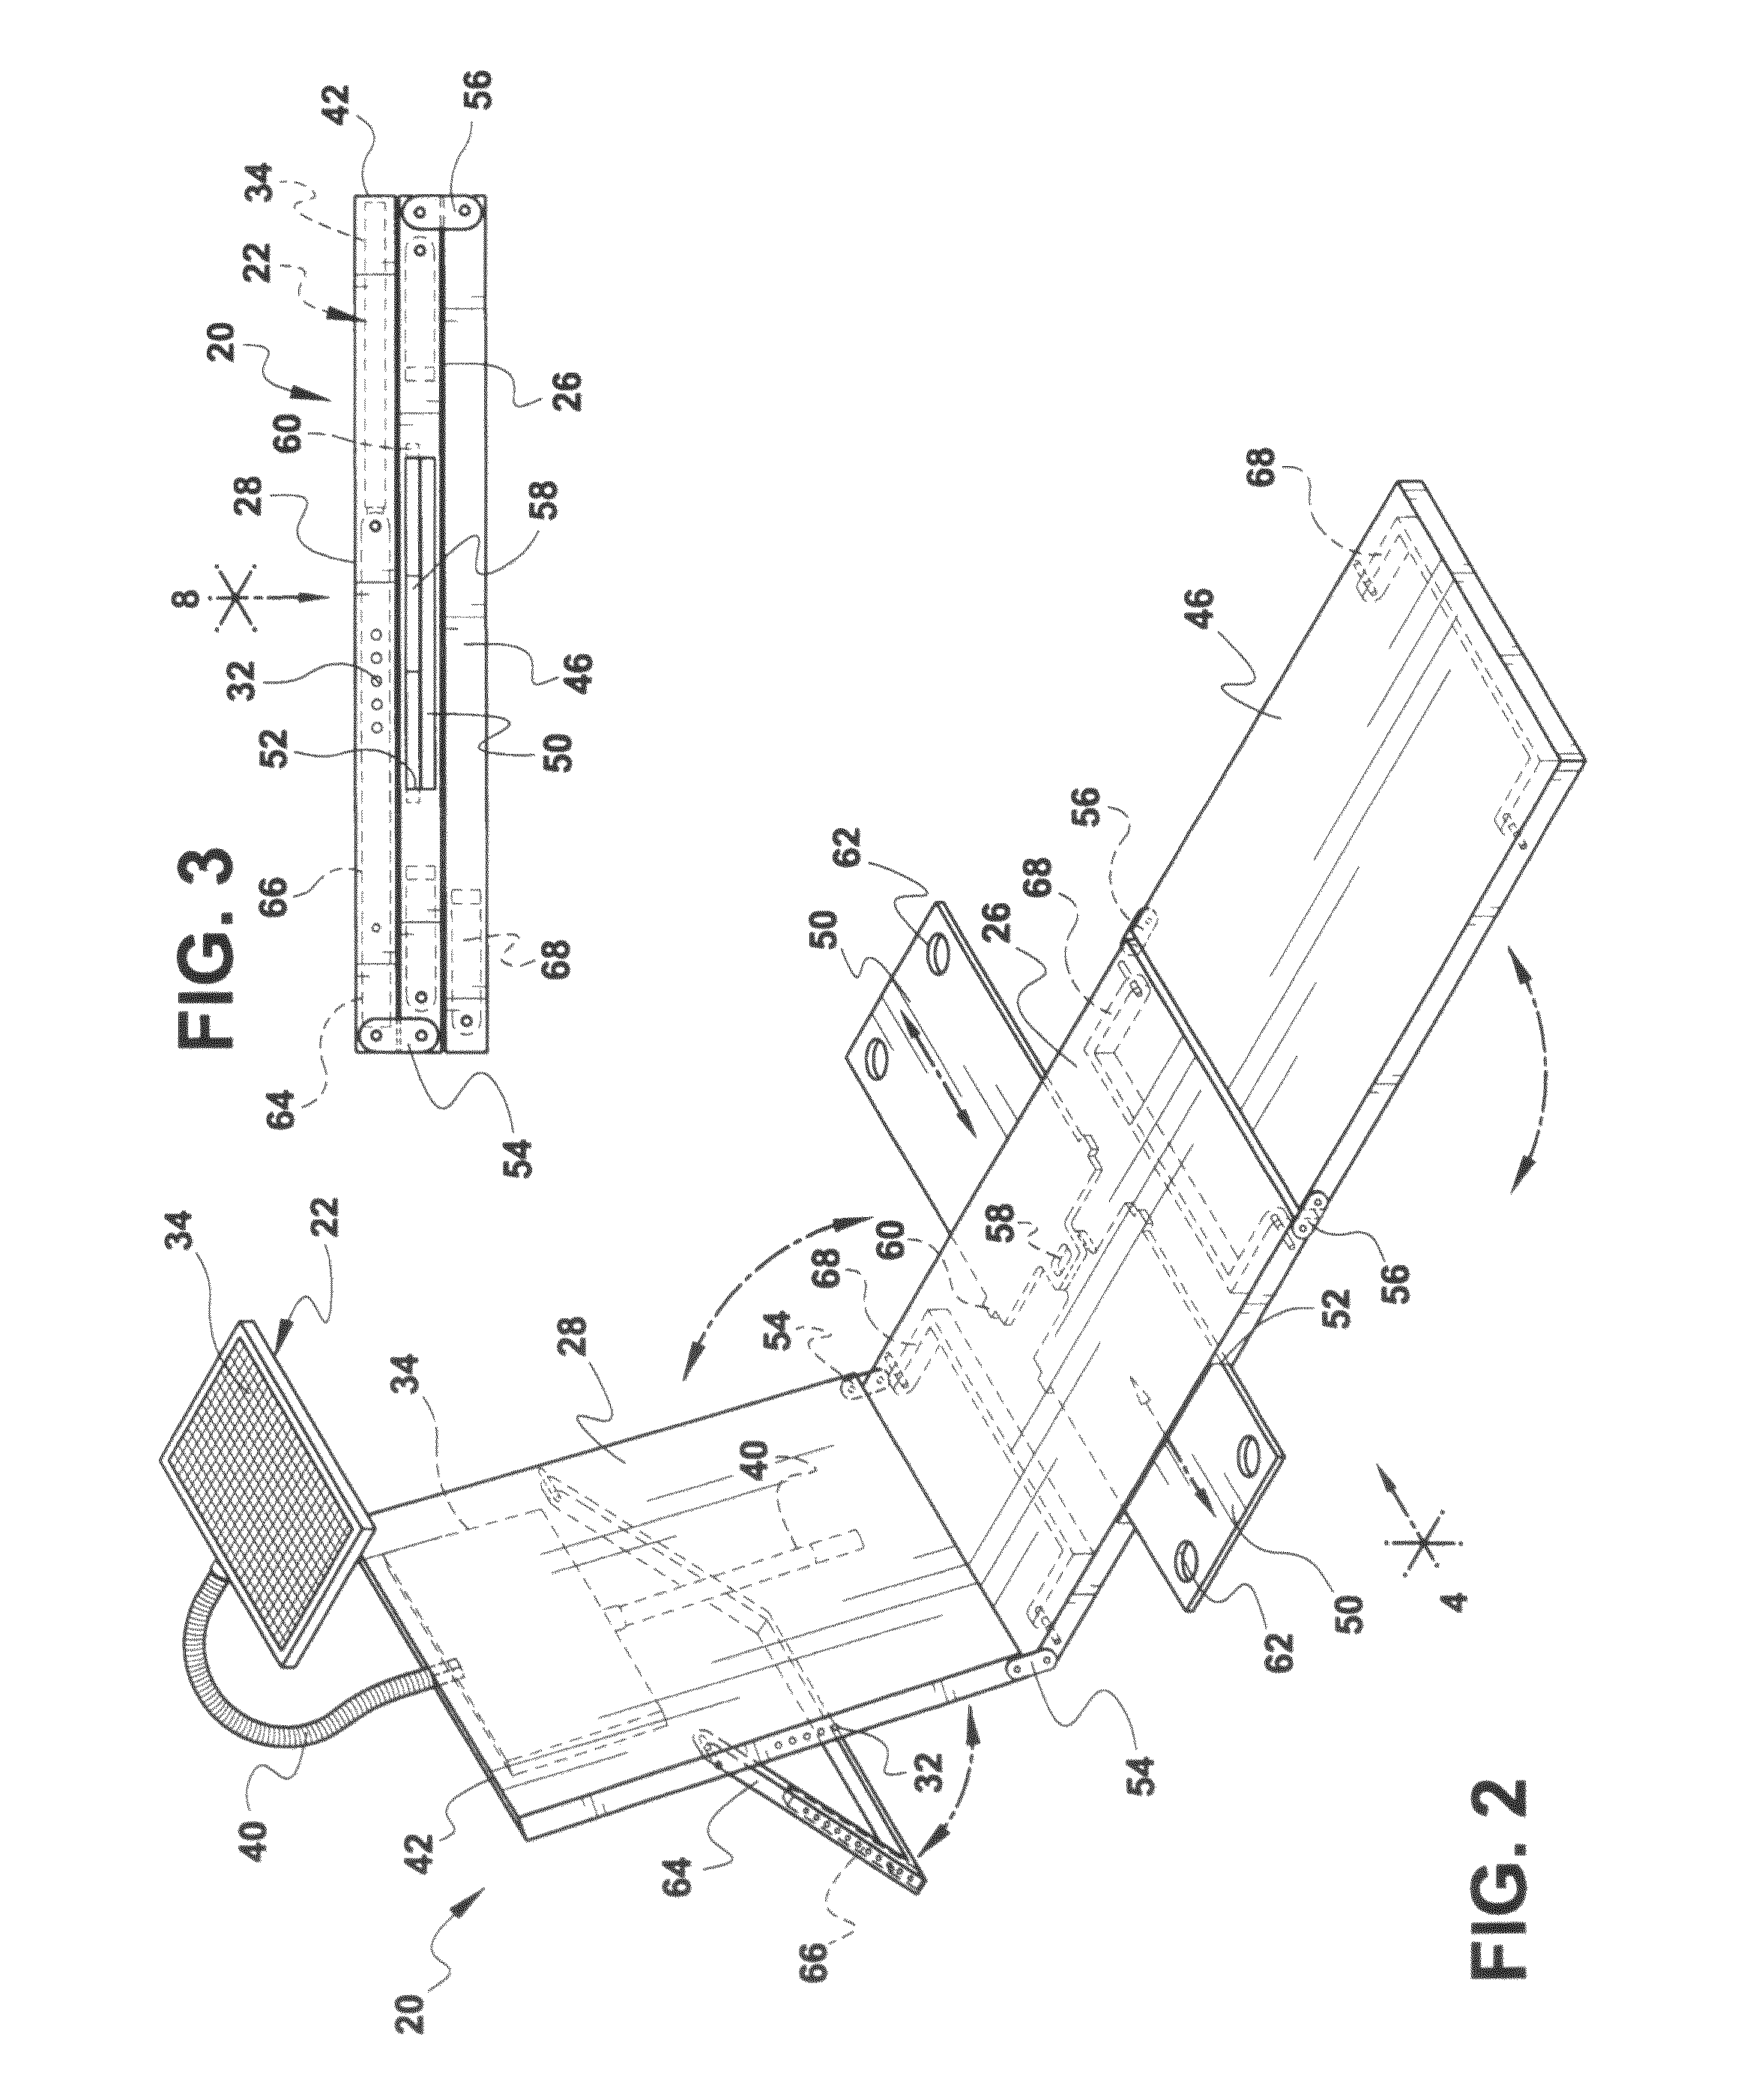 Chair provision with an apparatus for converting solar energy to power electrical devices